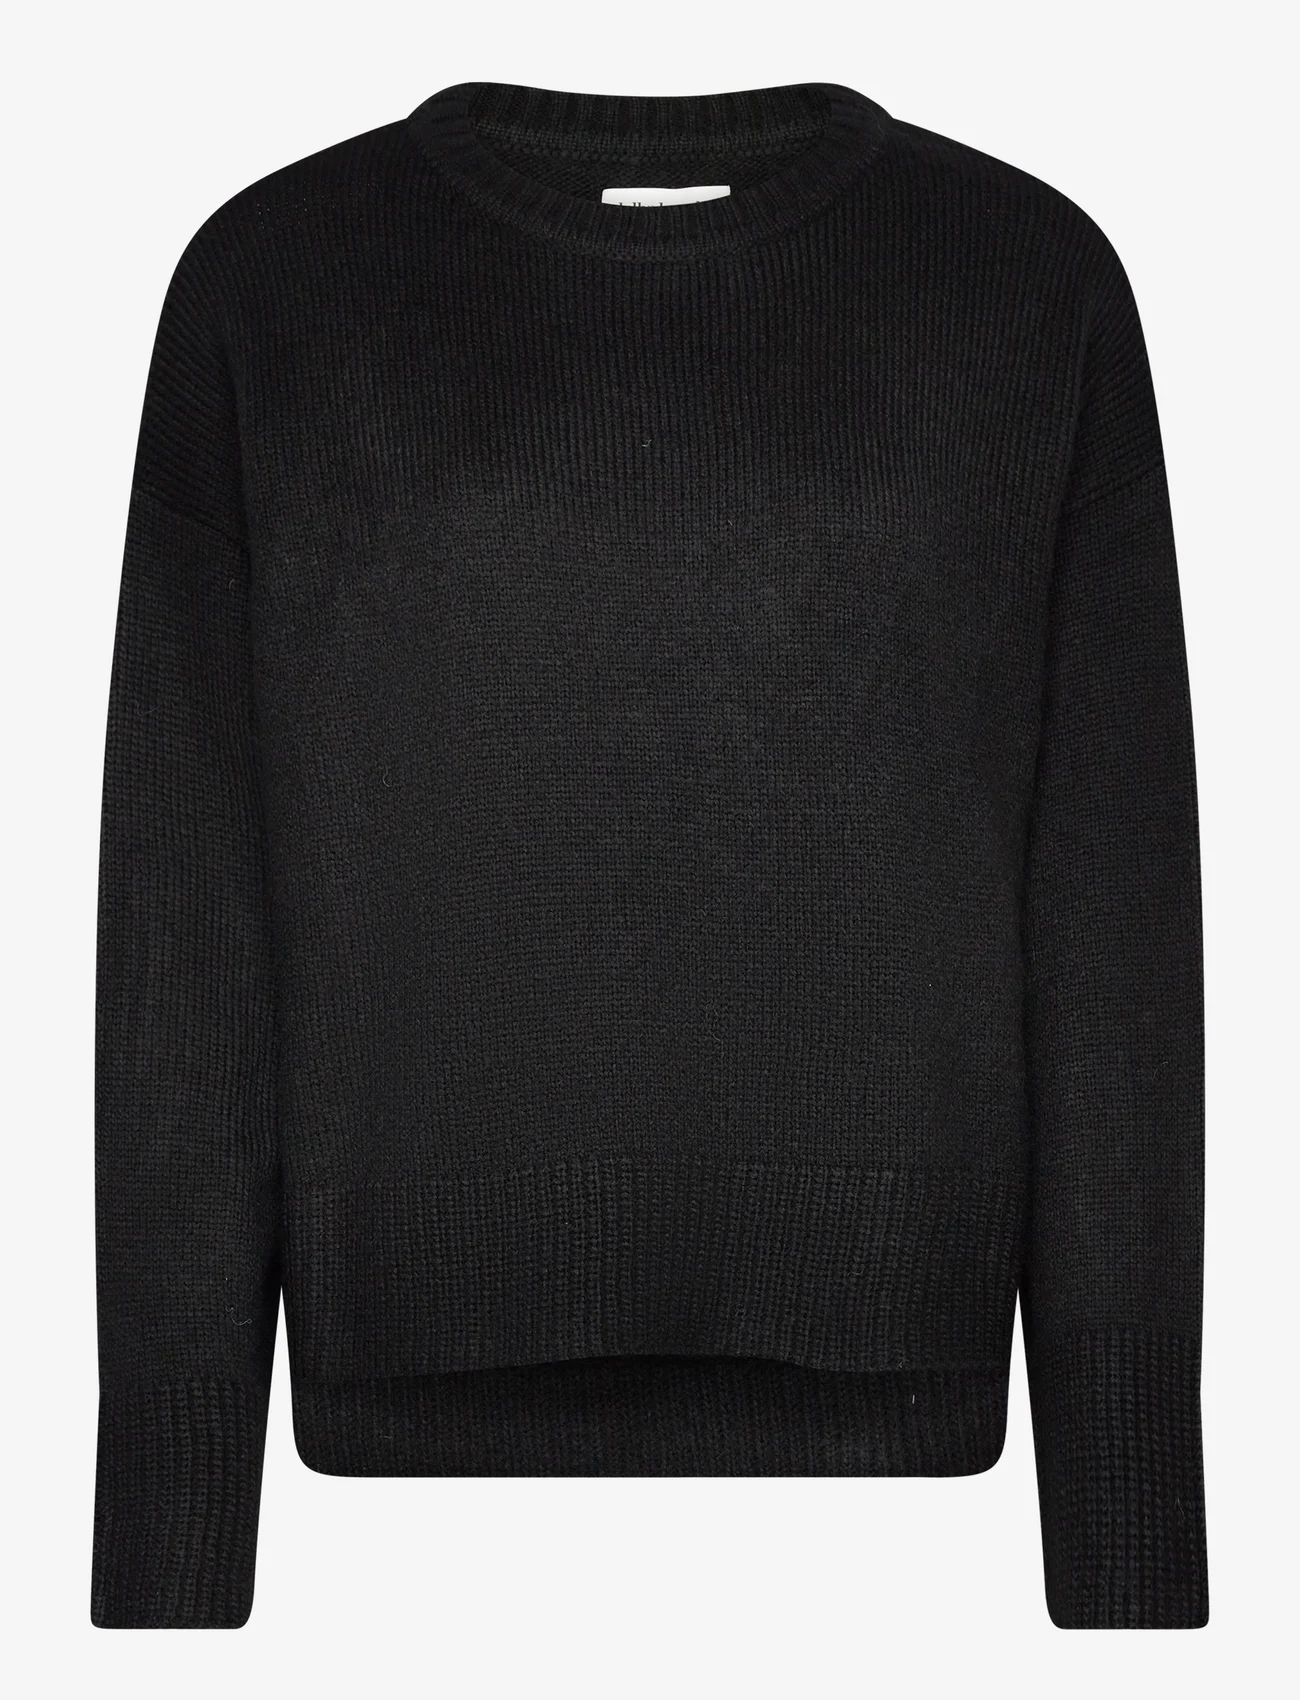 Lollys Laundry - Inverness Jumper - swetry - 99 black - 0